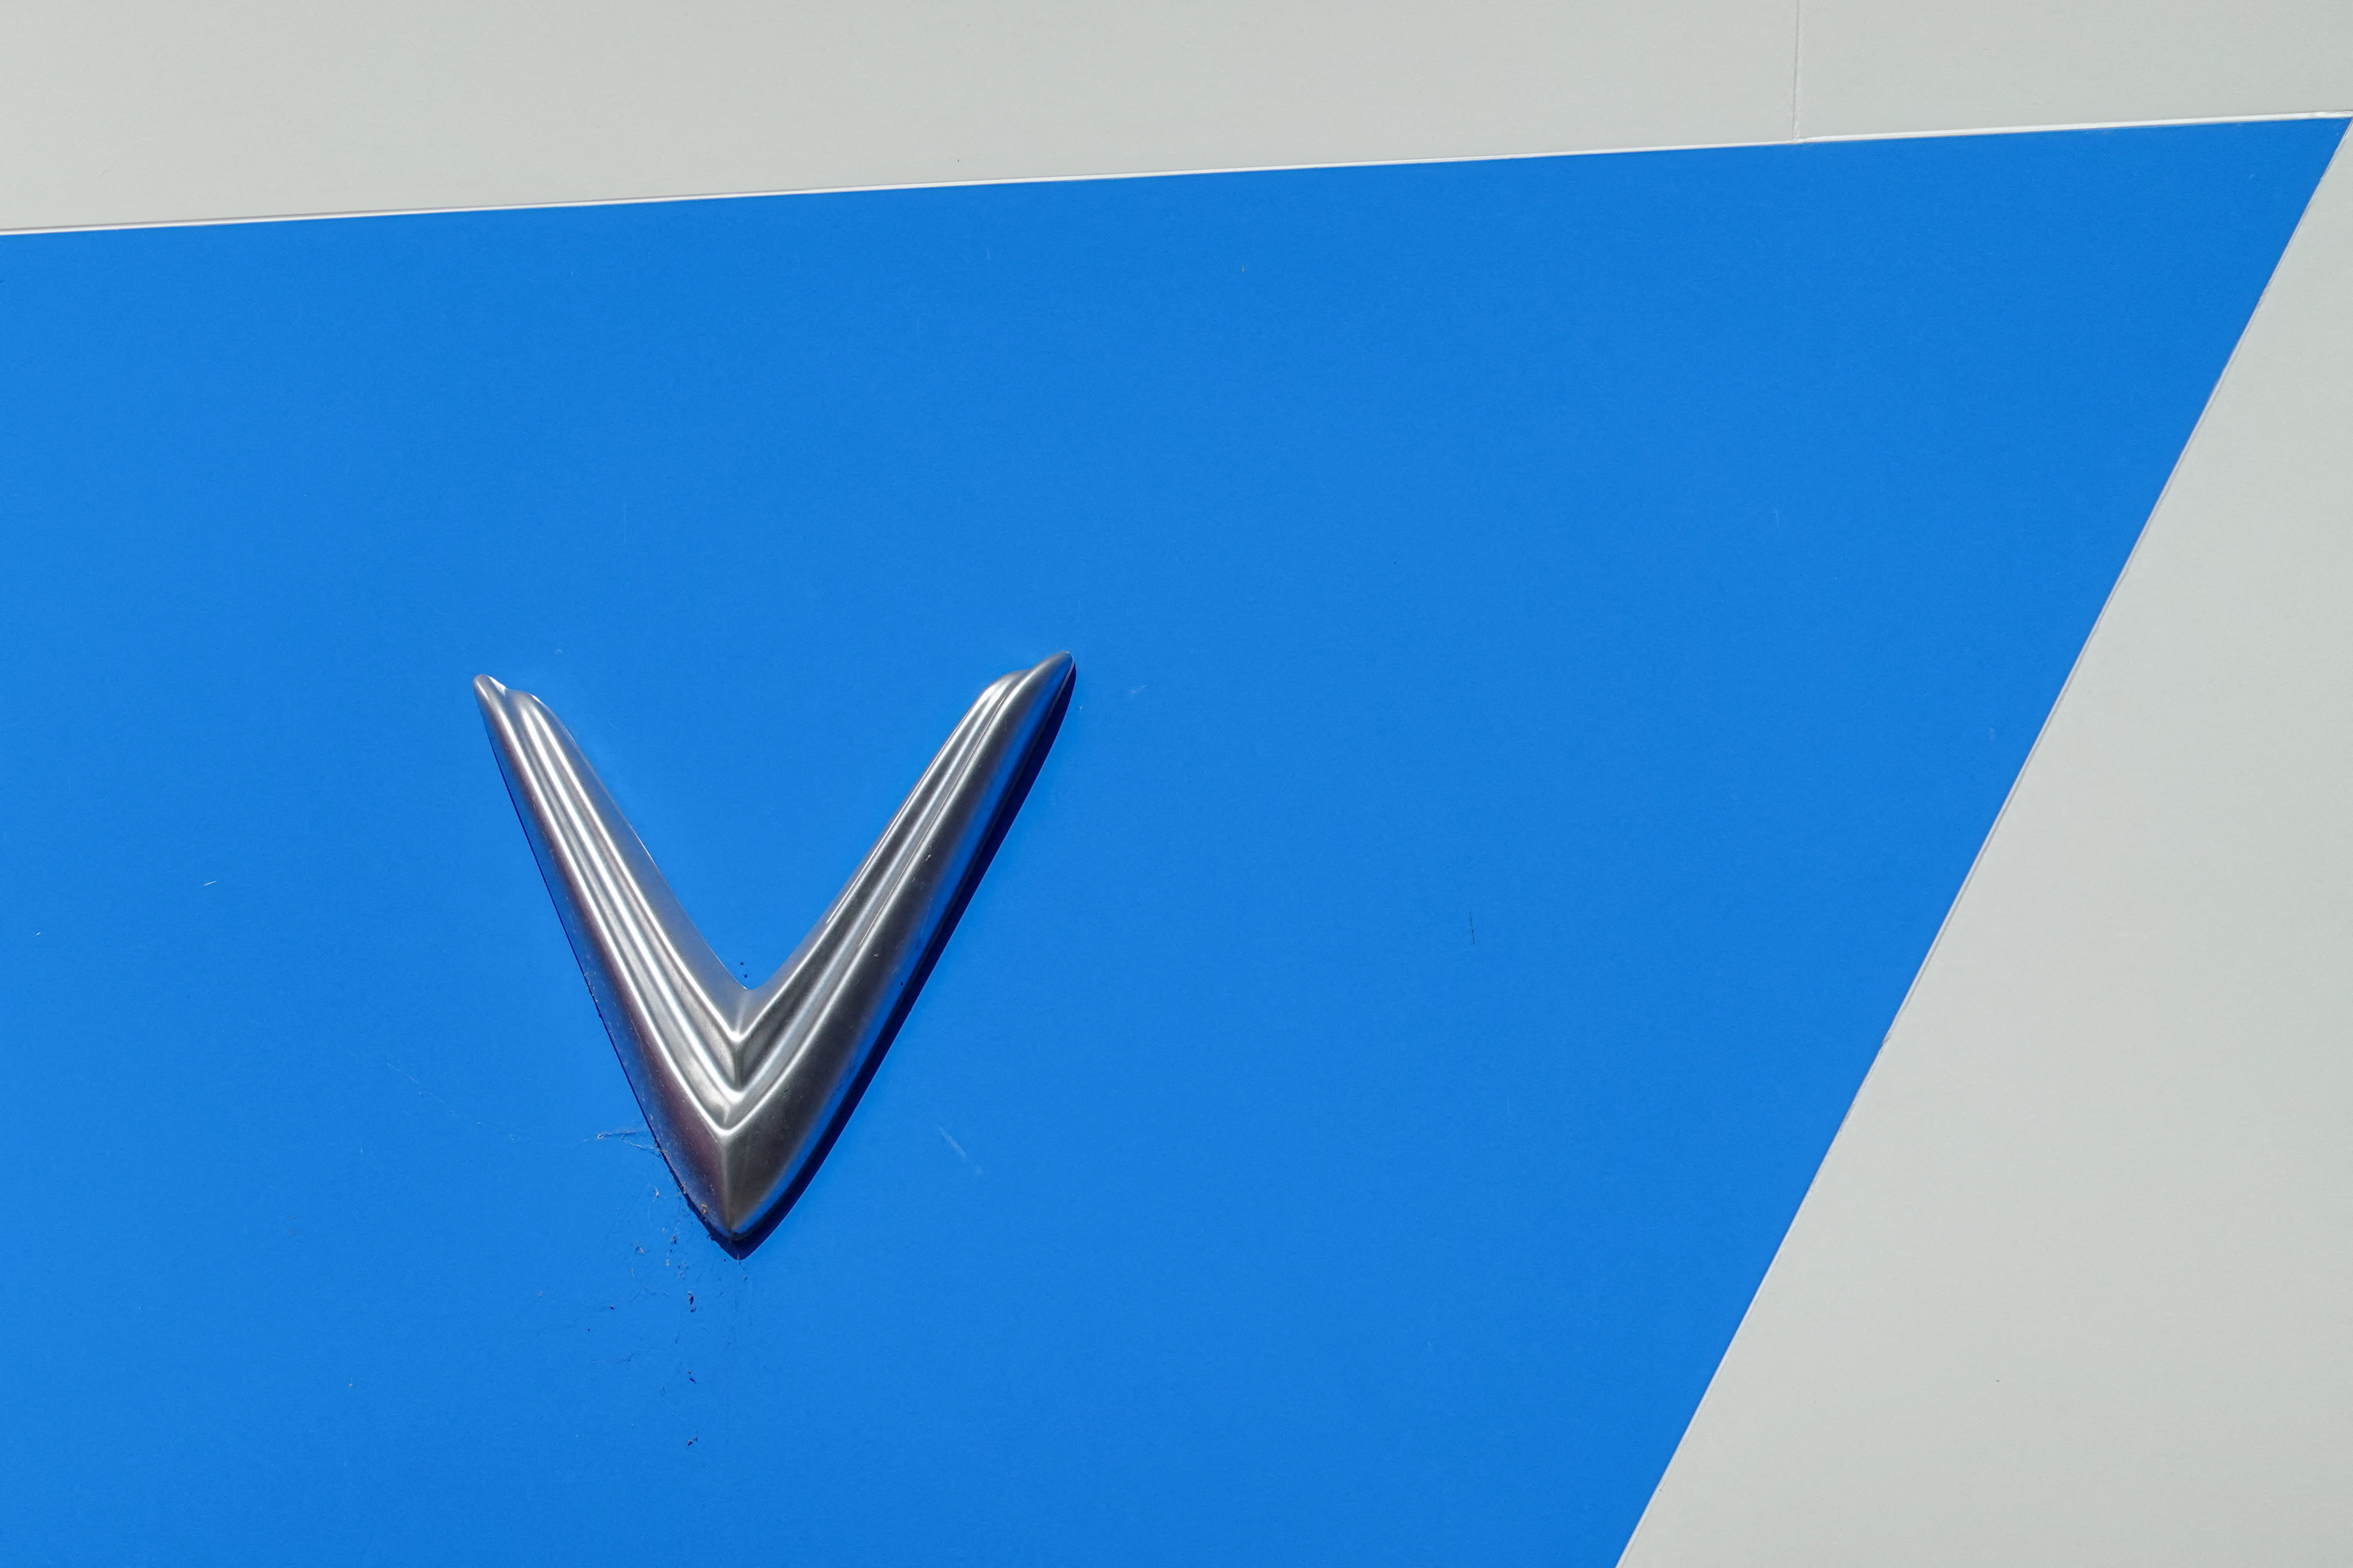 A Vinfast electric vehicle logo on a company store in California